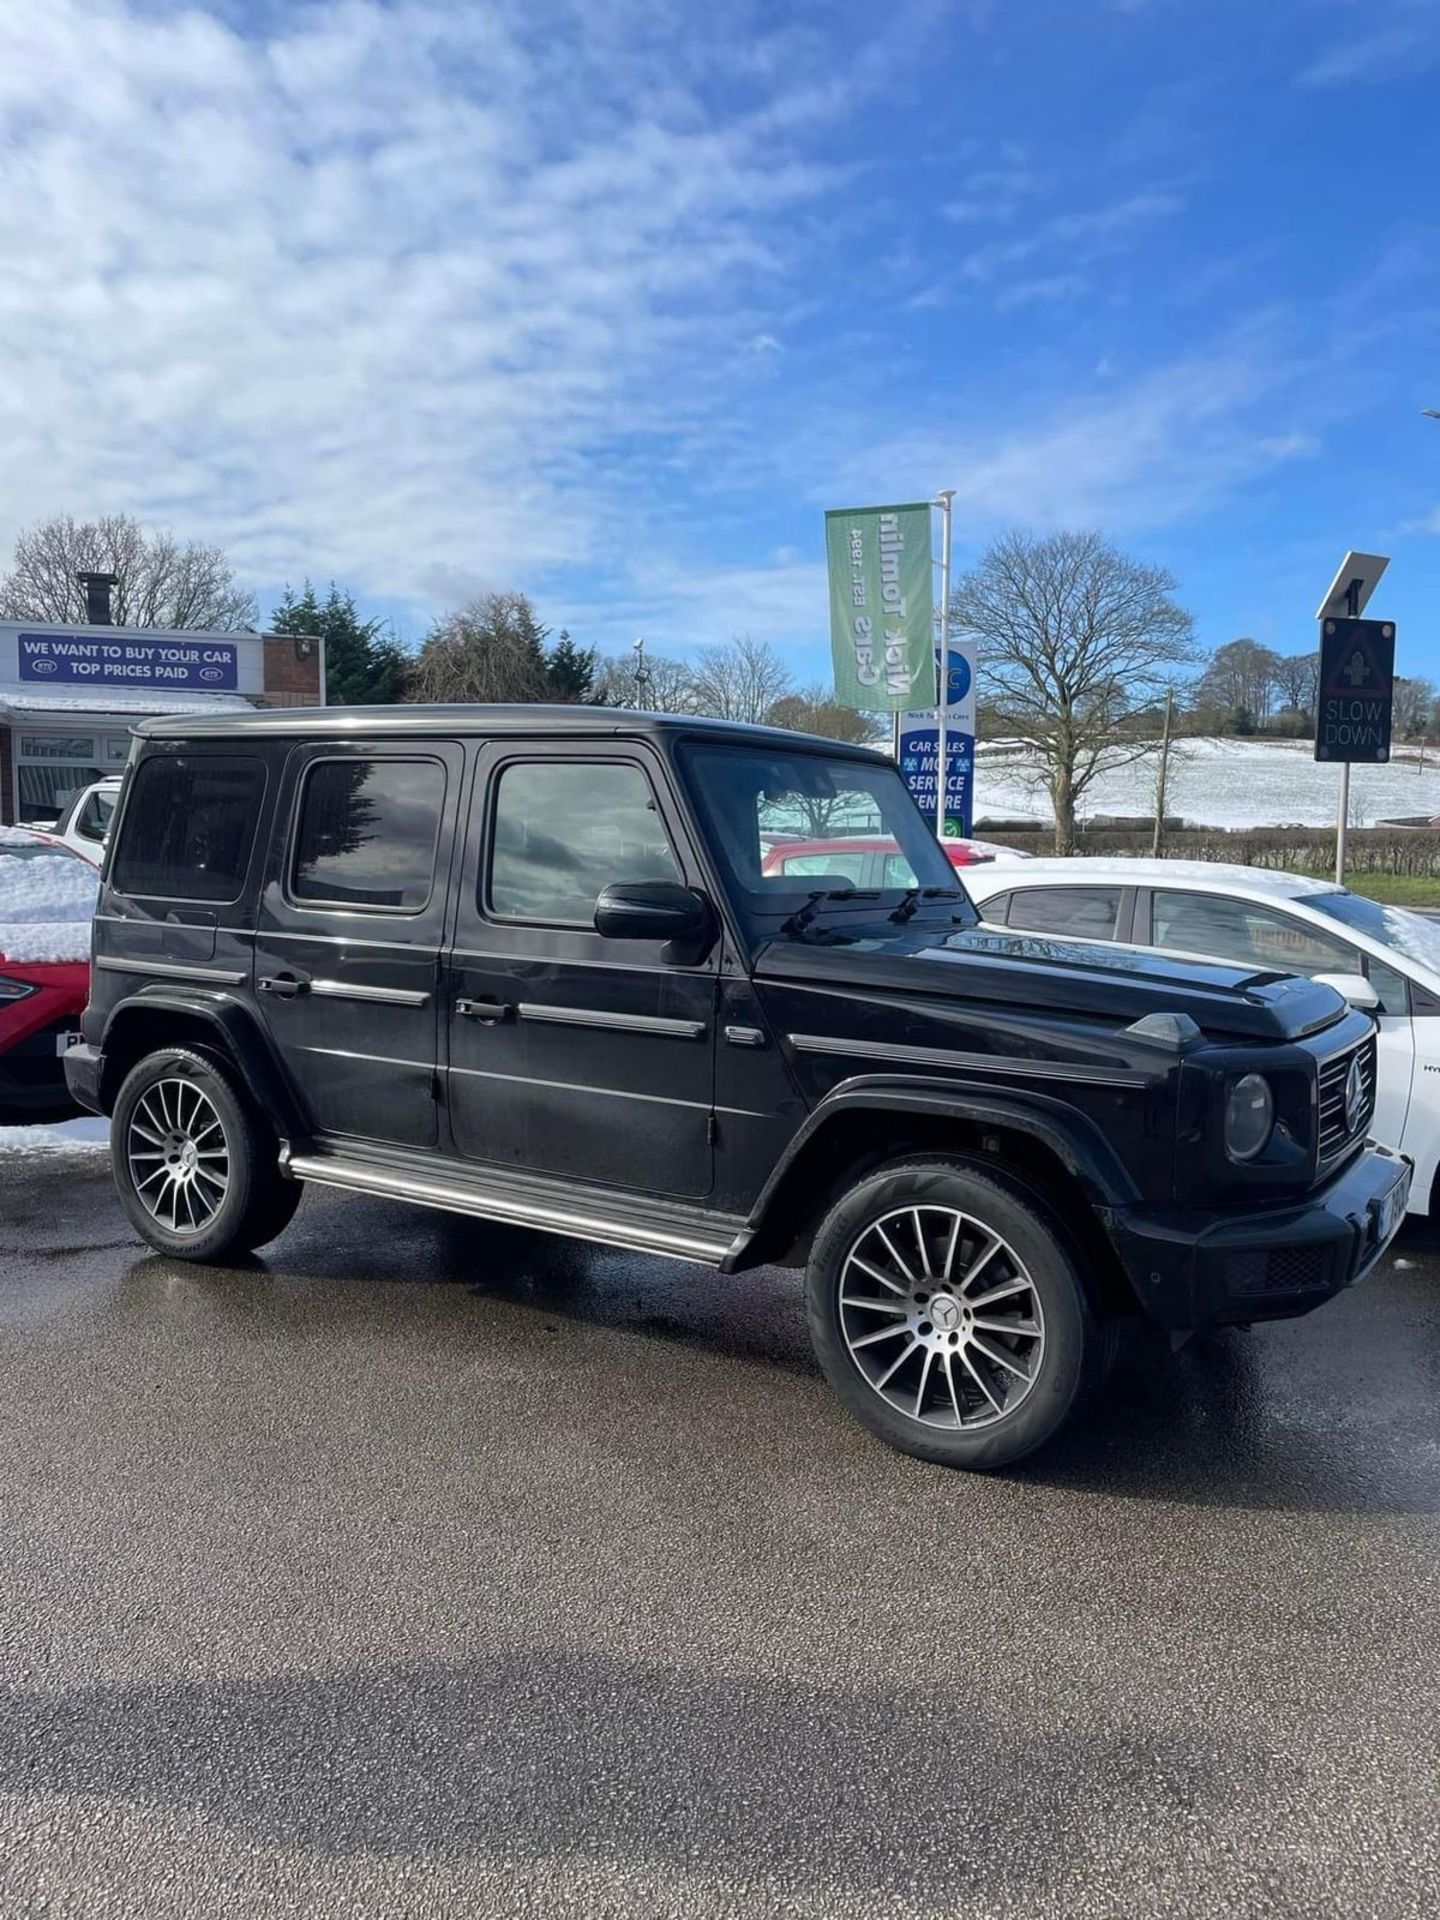 2019/19 REG MERCEDES-BENZ G350 AMG LINE PREMIUM D 4M AUTOMATIC, SHOWING 0 FORMER KEEPERS *PLUS VAT* - Image 6 of 9